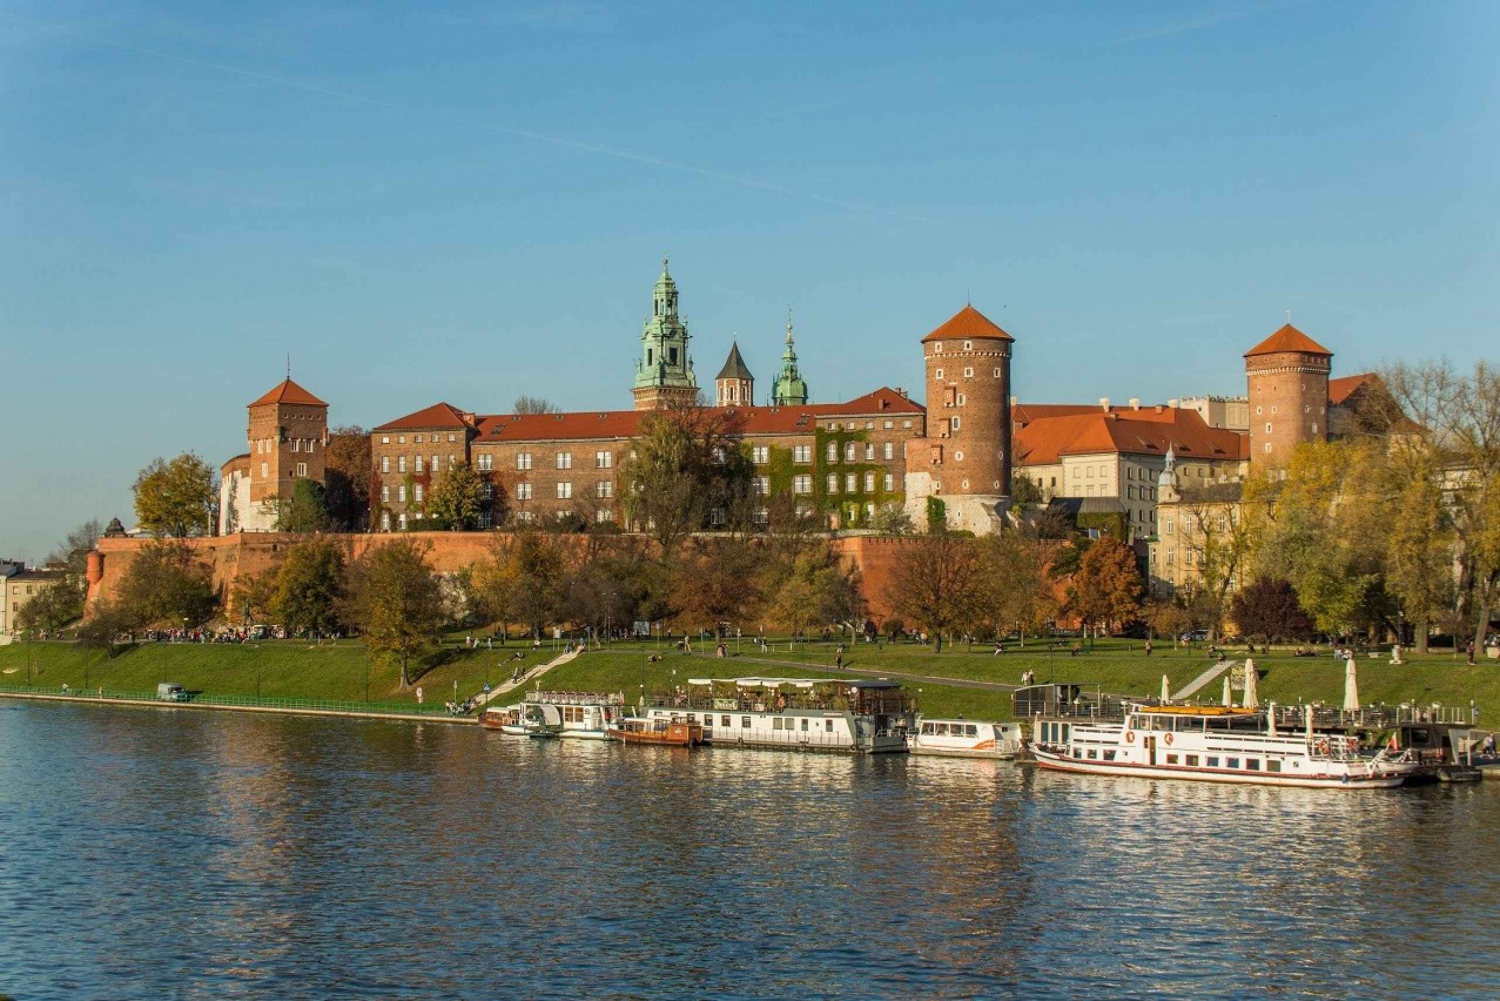 Krakow: Wawel Guided Tour with Lunch and River Cruise